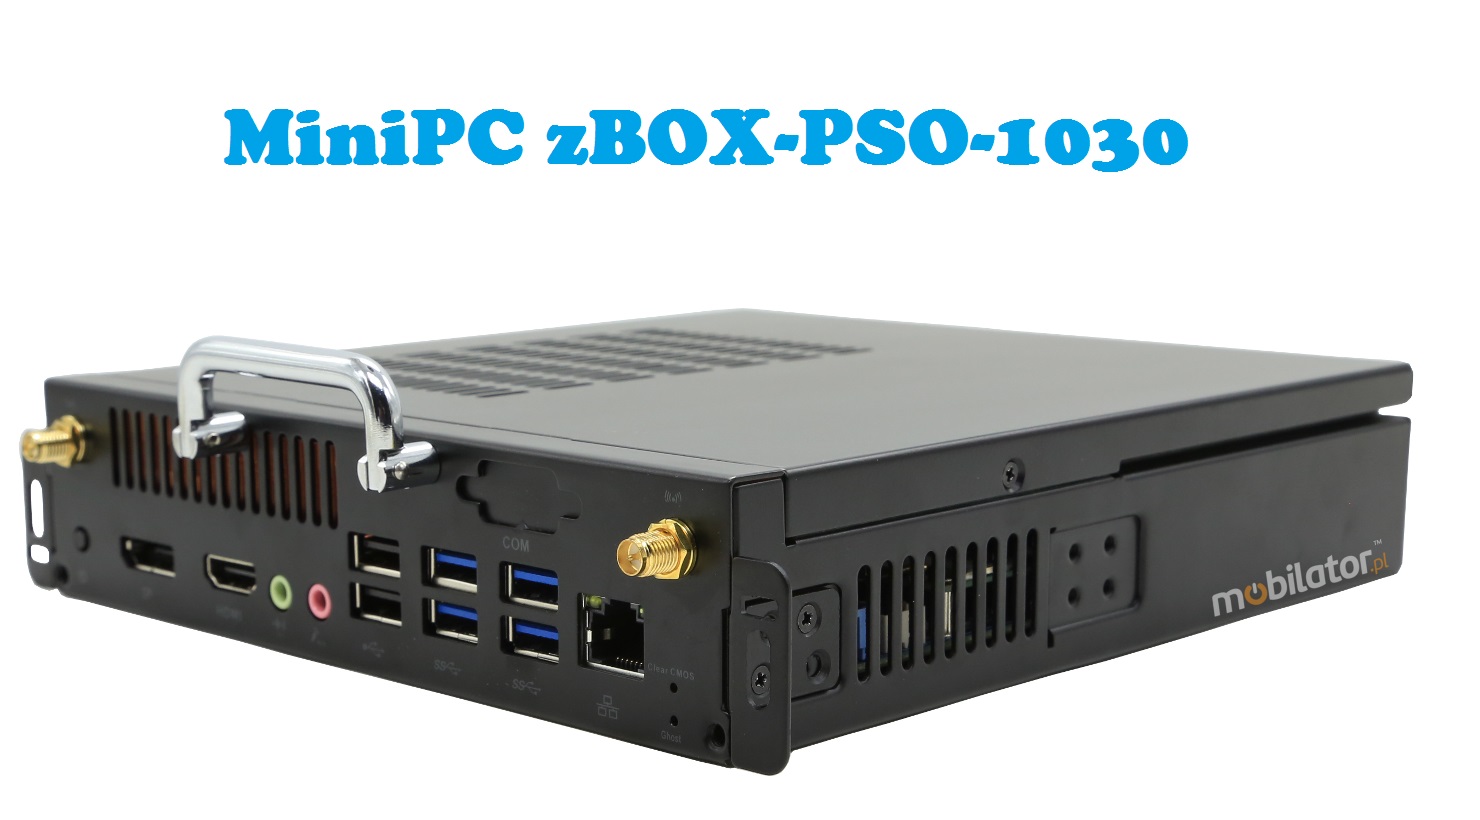 Strengthened Industrial Computer with a dedicated card Nvidia GT1030 MiniPC graphics card with BOX-PSO-1030